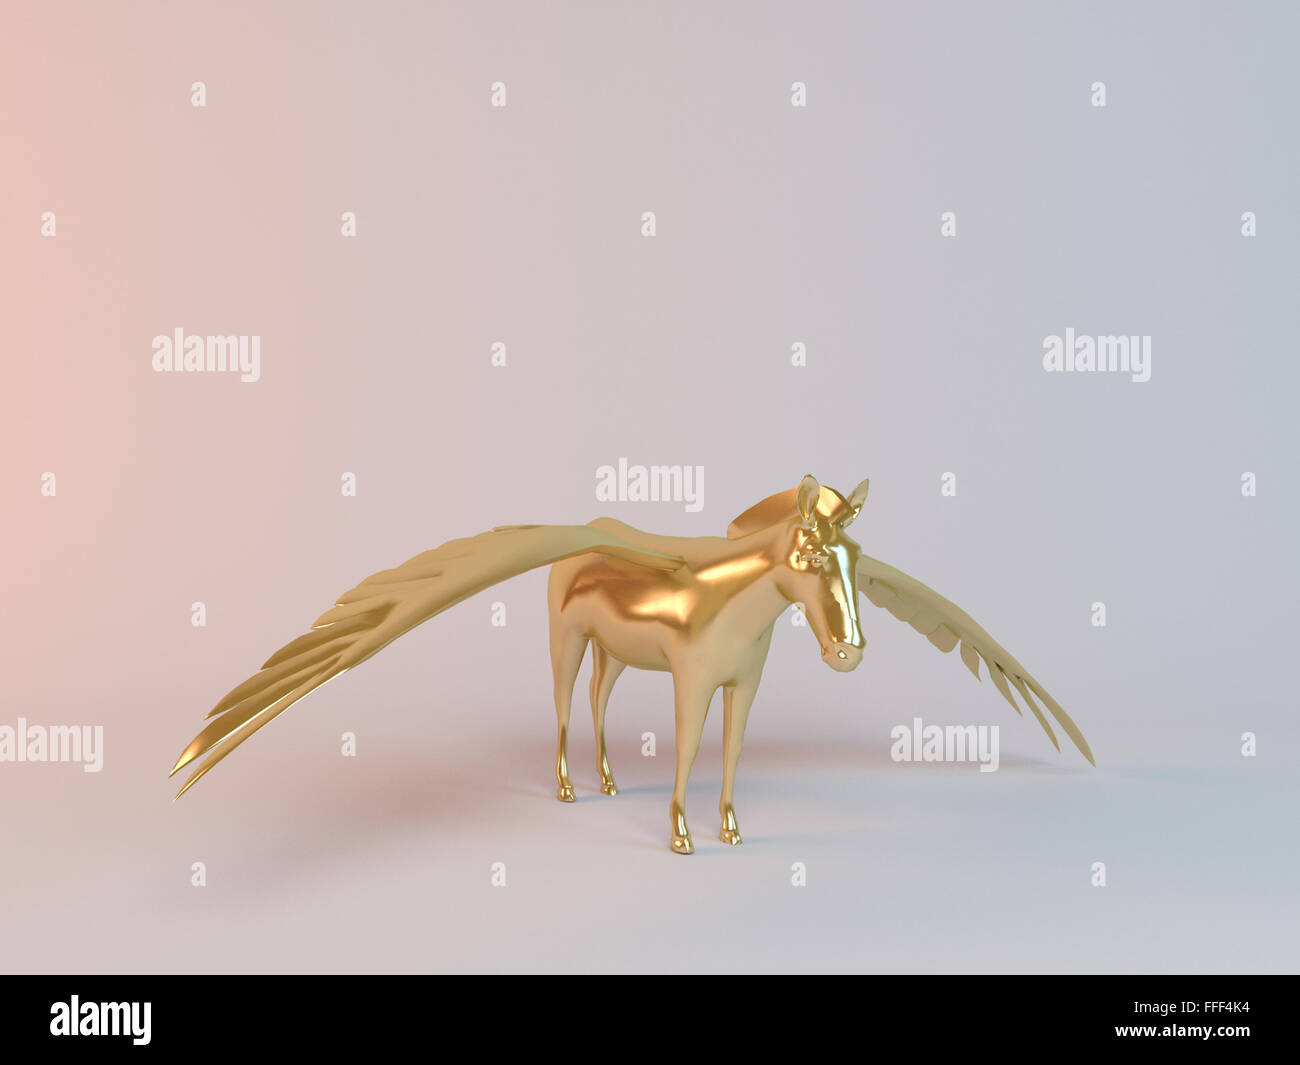 Golden 3D flying animal inside a stage with high render quality to be used as a logo, medal, symbol, shape, emblem, icon, Stock Photo